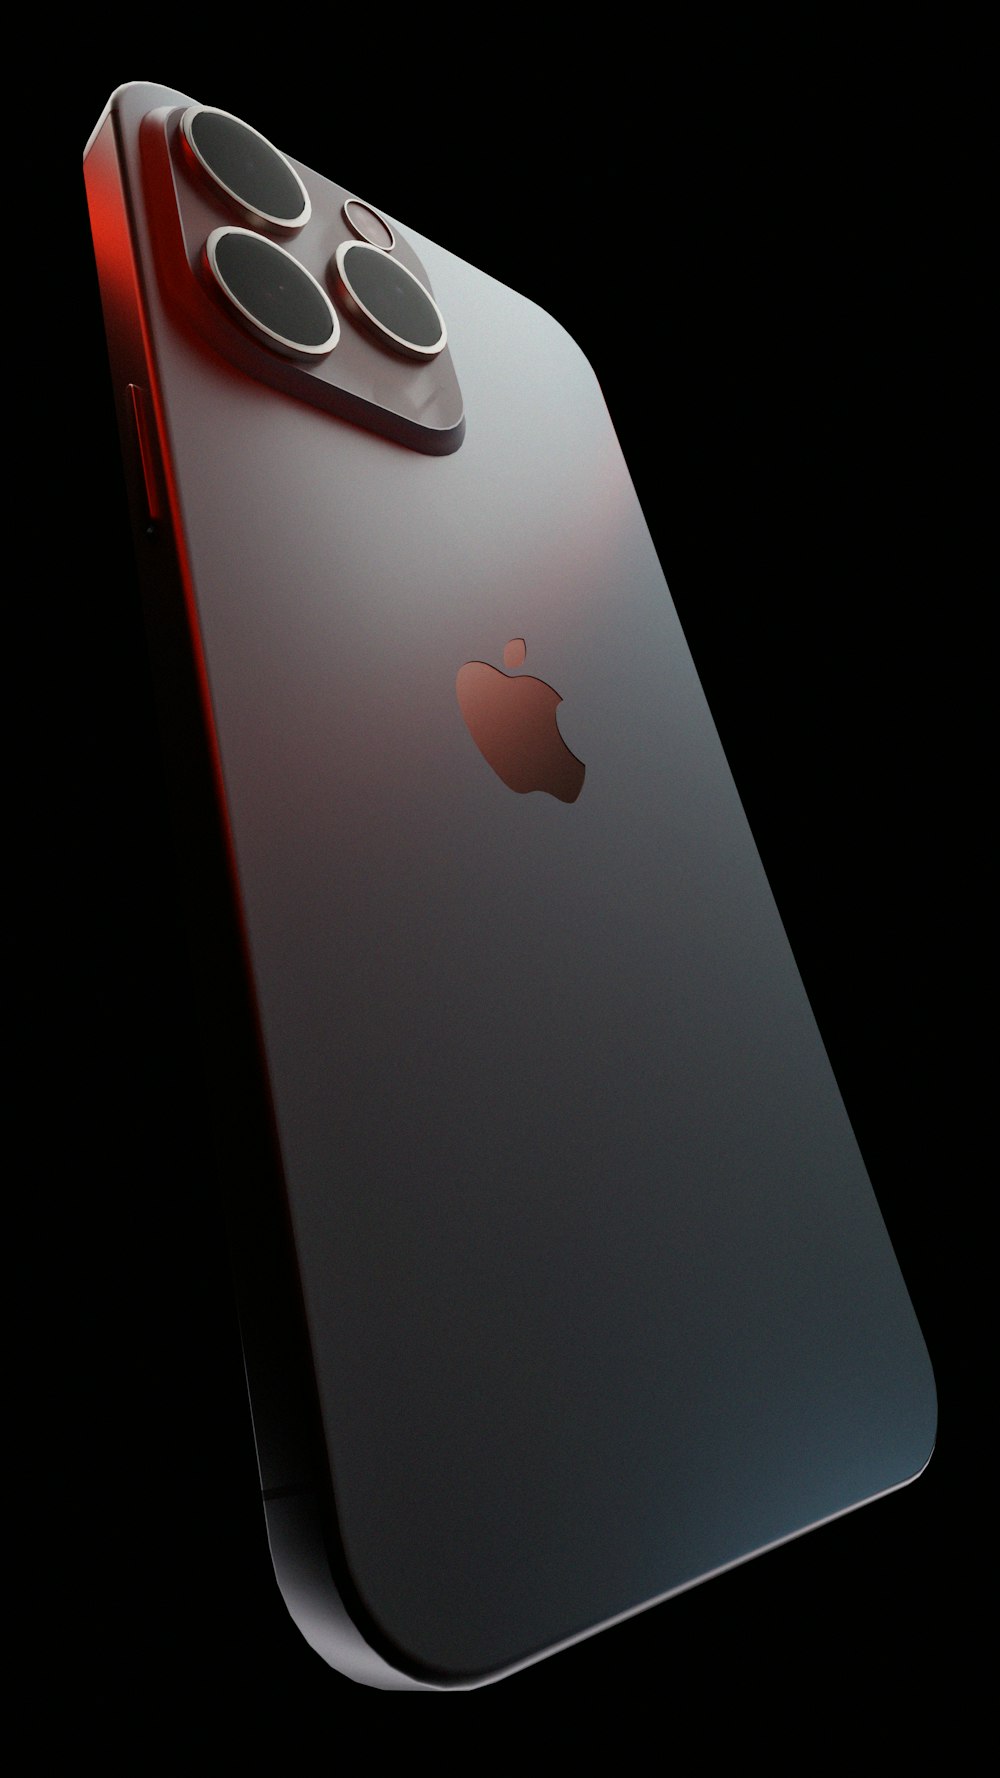 a close up of an iphone with a remote control